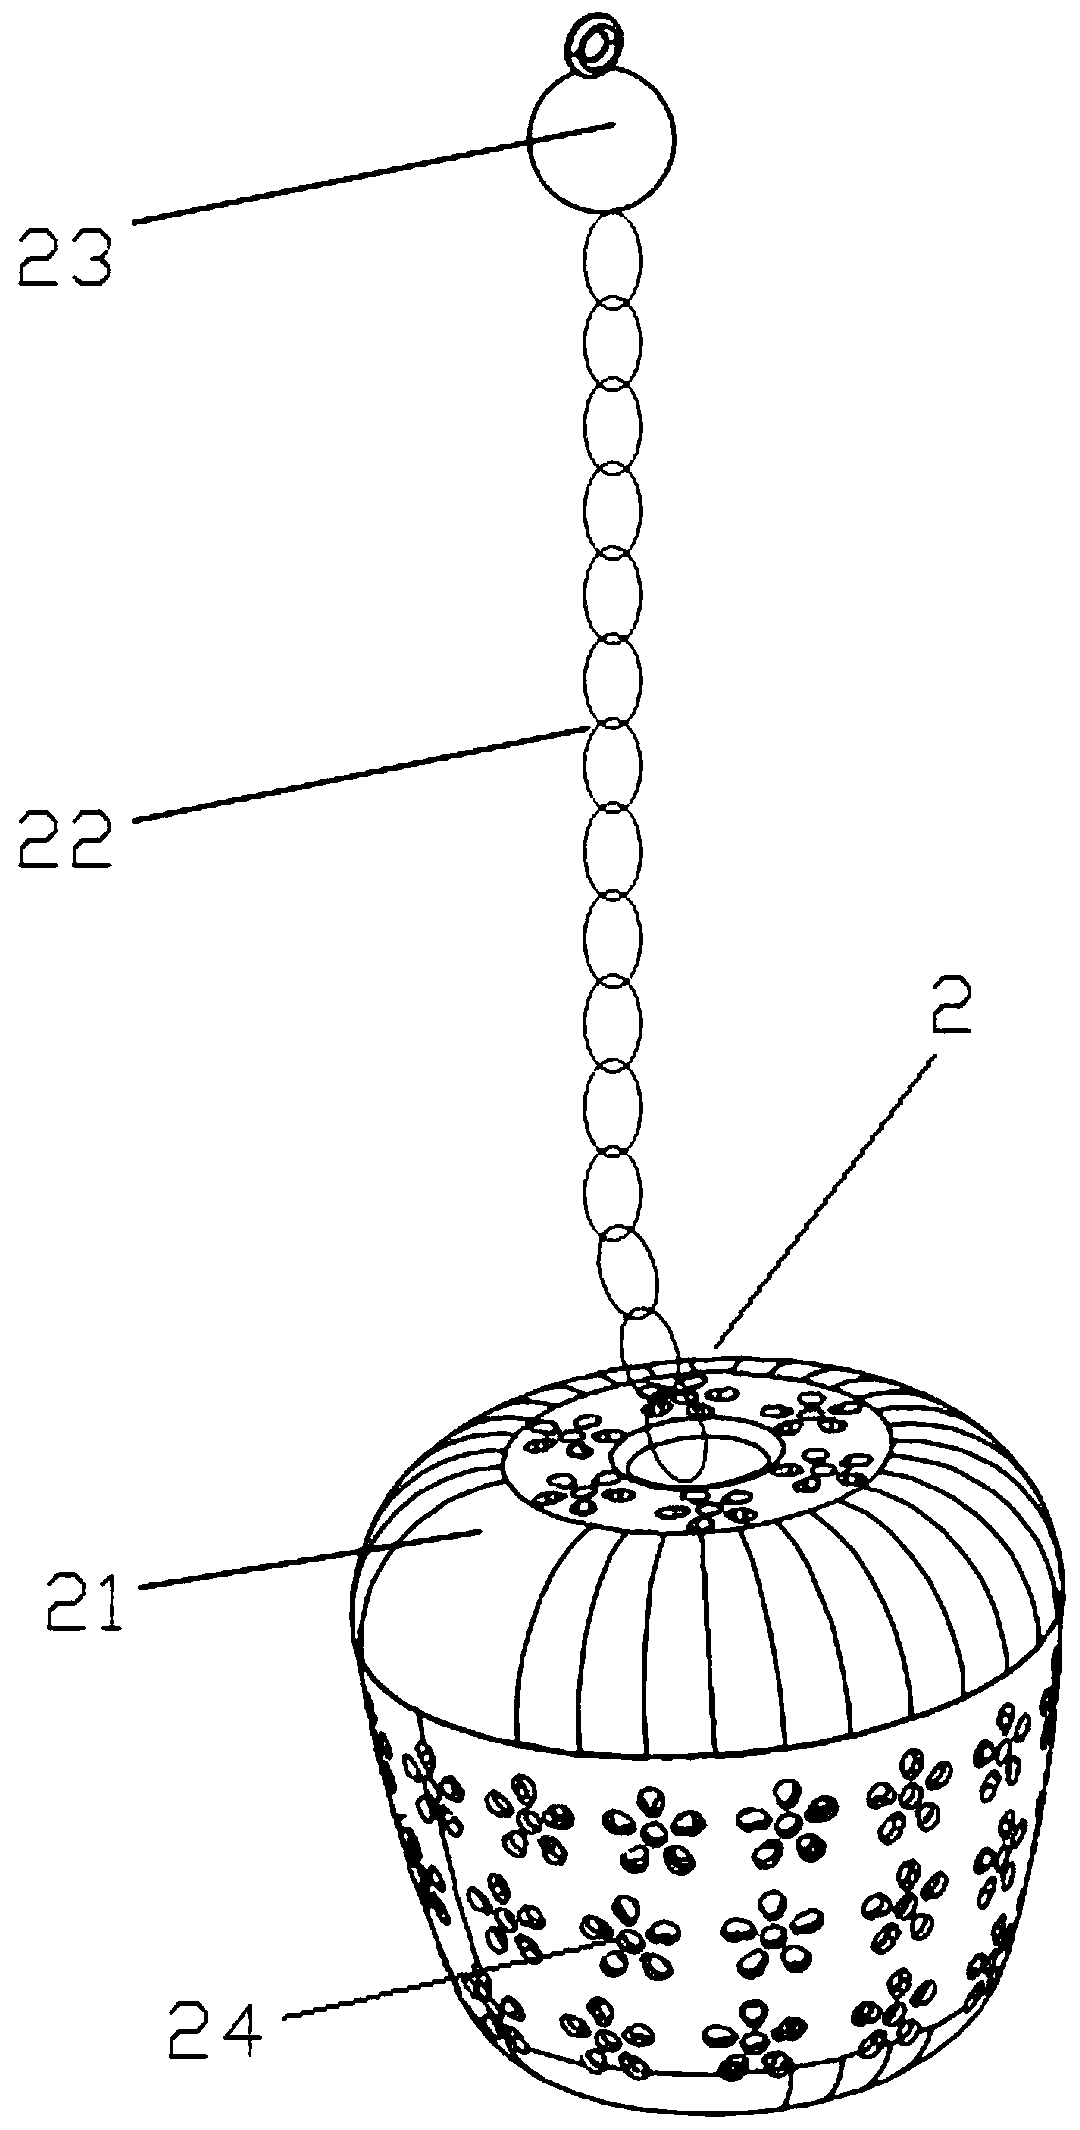 Intelligent teacup control system and method